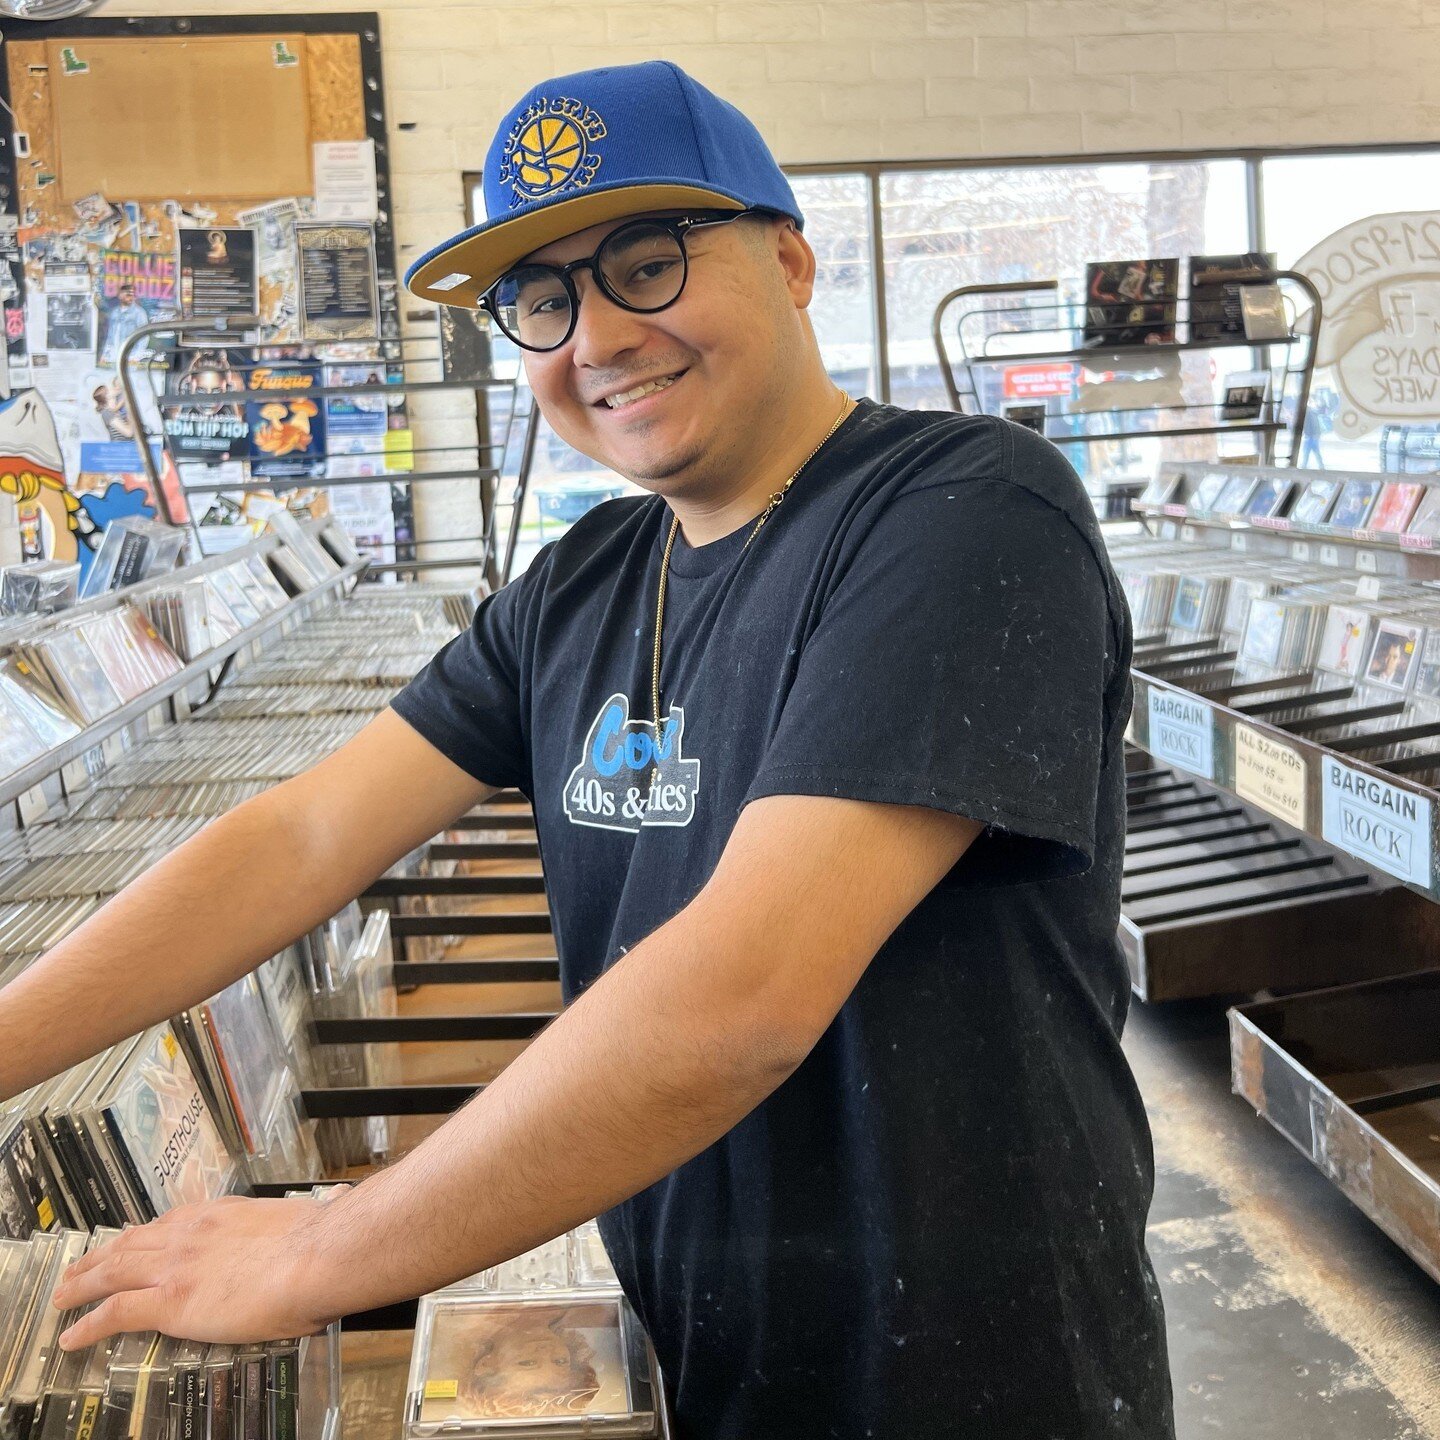 Our friend Vincent just got hired by @streetlightrecordssantacruz, and we couldn't be happier for him! Congrats to Streetlight Records for making such a great addition to your team!

#celebrate #congratulations #appreciation #disabilityrights #inclus